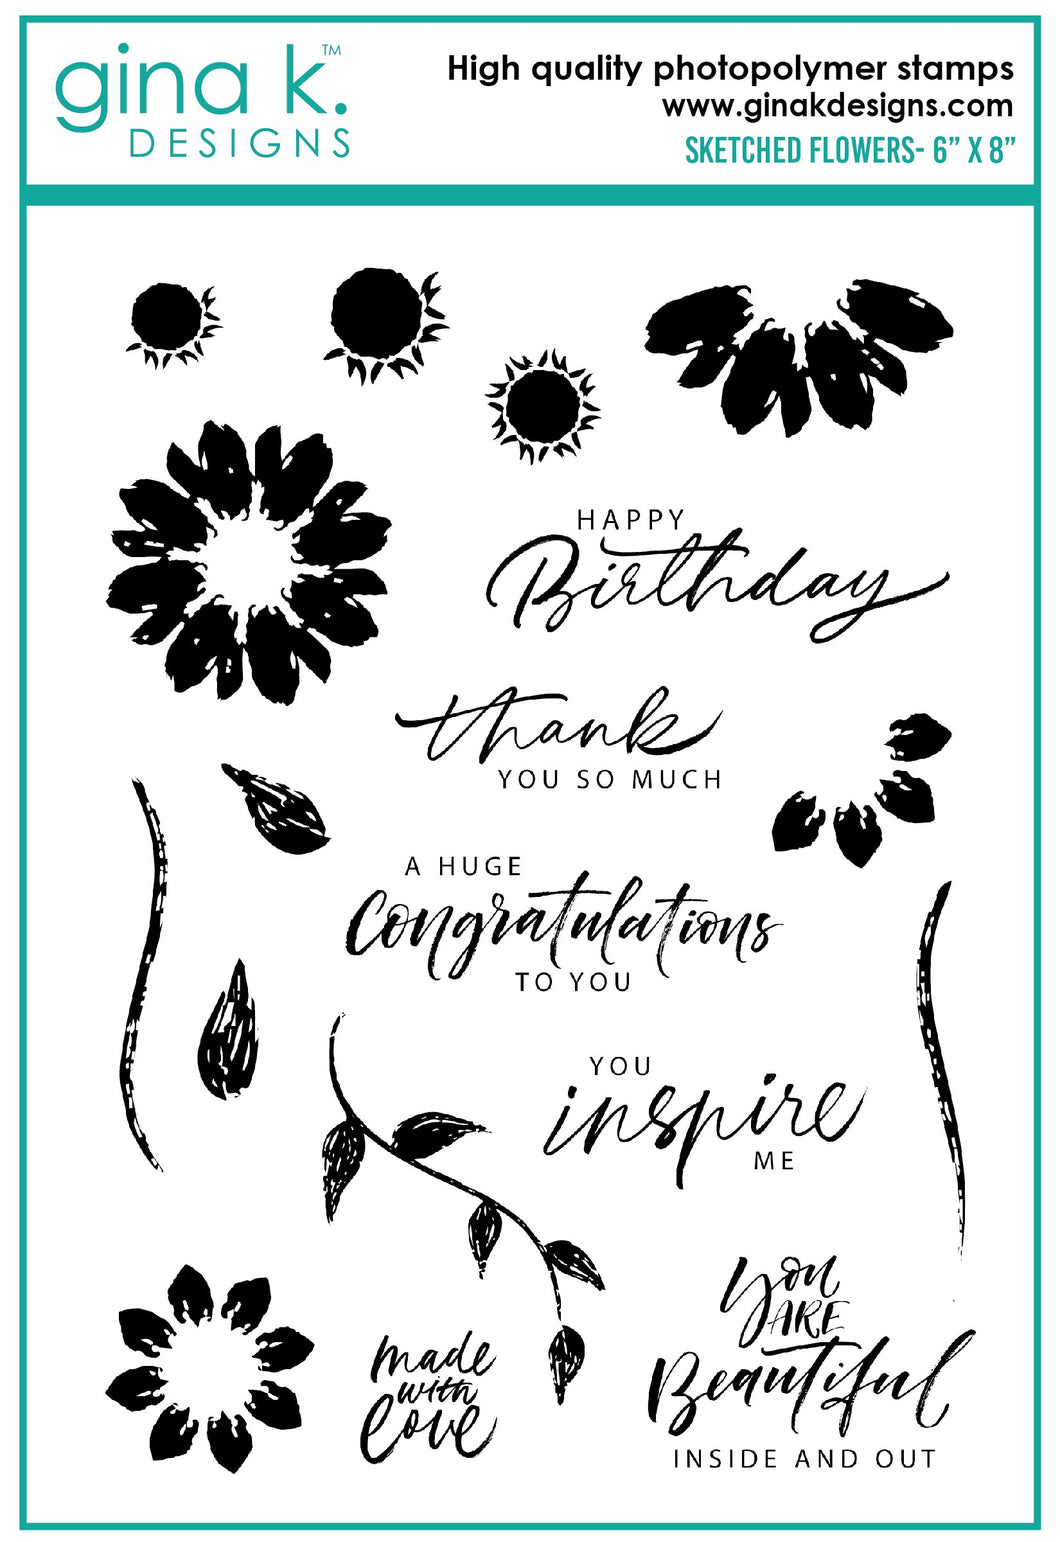 Gina K. Designs - Stamps - Sketched Flowers. Sketched Flowers is a stamp set by Gina K Designs. This set is made of premium clear photopolymer and measures 6